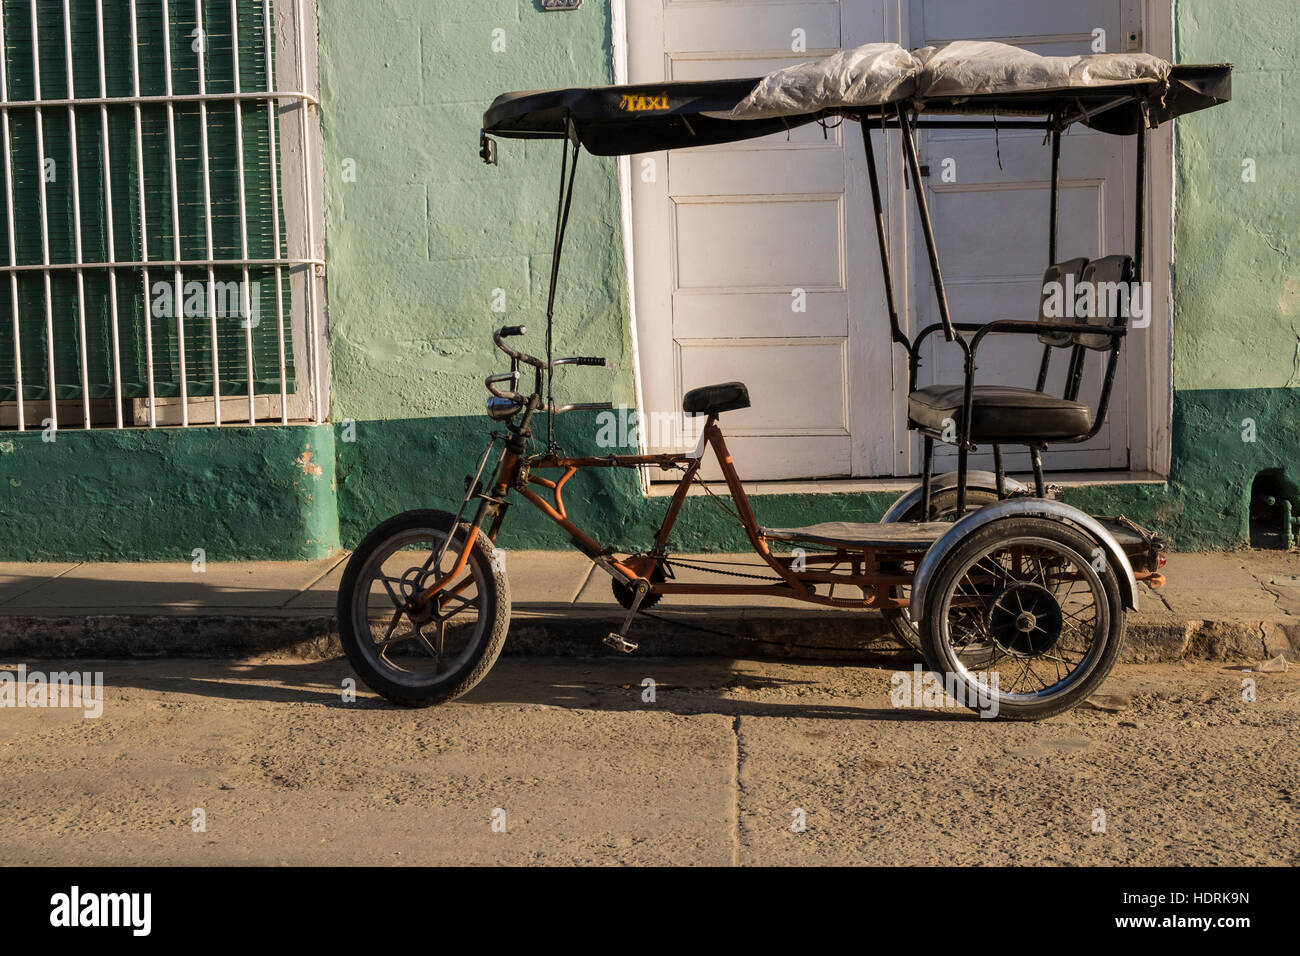 Tricycle taxi parked outside house, Trinidad, Cuba Stock Photo